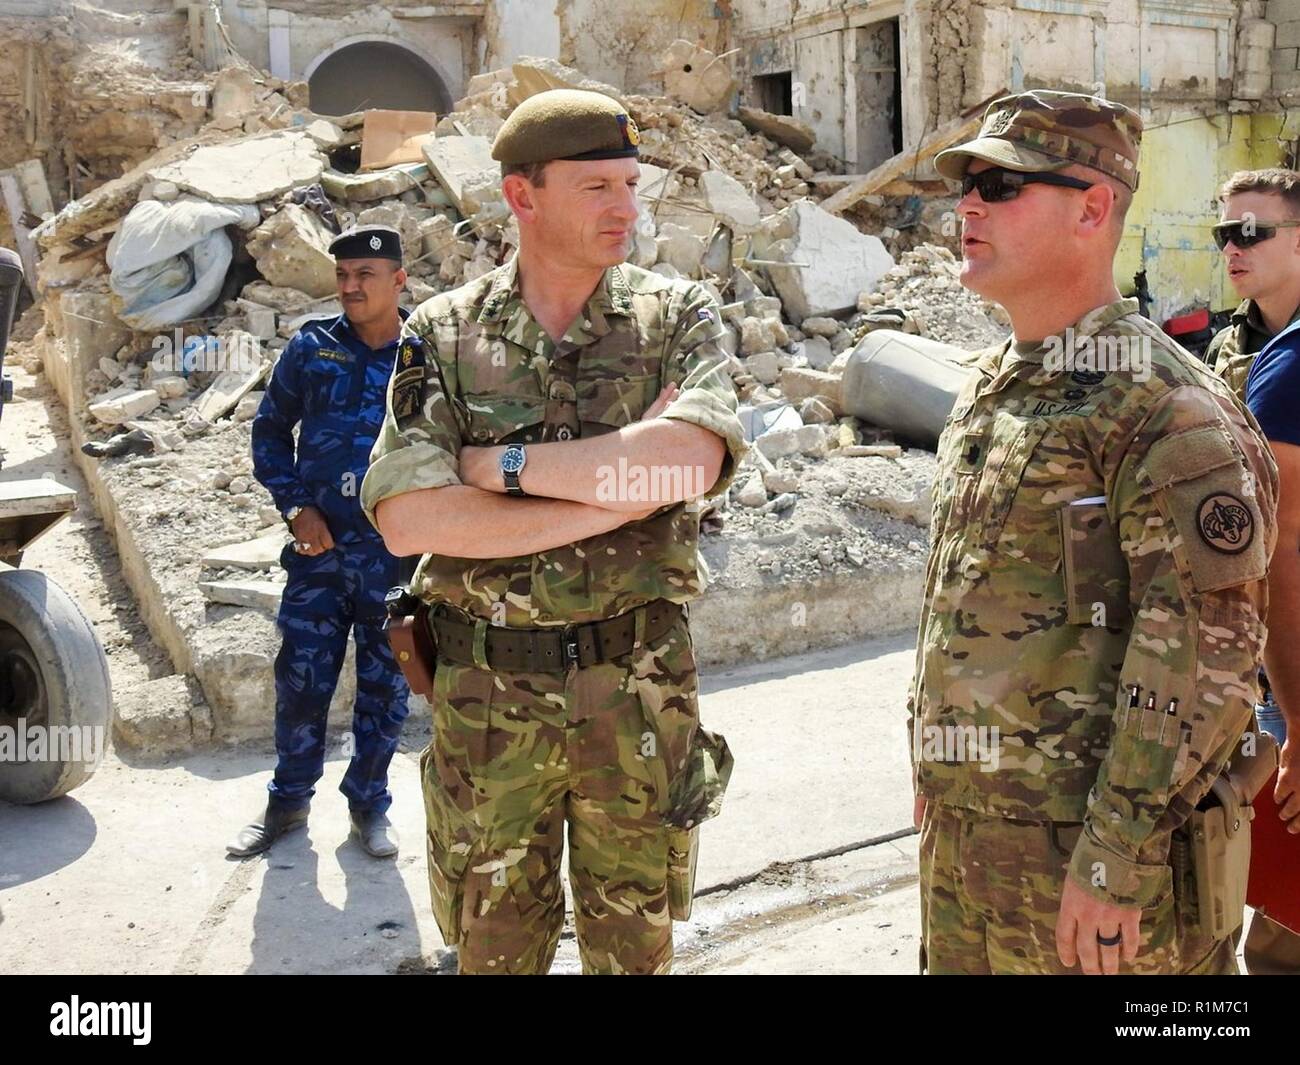 U.S. Army Lt. Col. CJ Kirkpatrick, a squadron commander with 3rd Cavalry Regiment, escorts British Maj. Gen. Christopher Ghika, Combined Joint Task Force – Operation Inherent Resolve Deputy Commander, through the streets of Mosul to observe the destruction caused by ISIS, Oct. 9, 2018. The 3rd Cavalry Regiment is deployed in support of Operation Inherent Resolve, working by, with and through the Iraqi Security Forces and coalition partners to defeat ISIS in areas of Iraq and Syria. Stock Photo